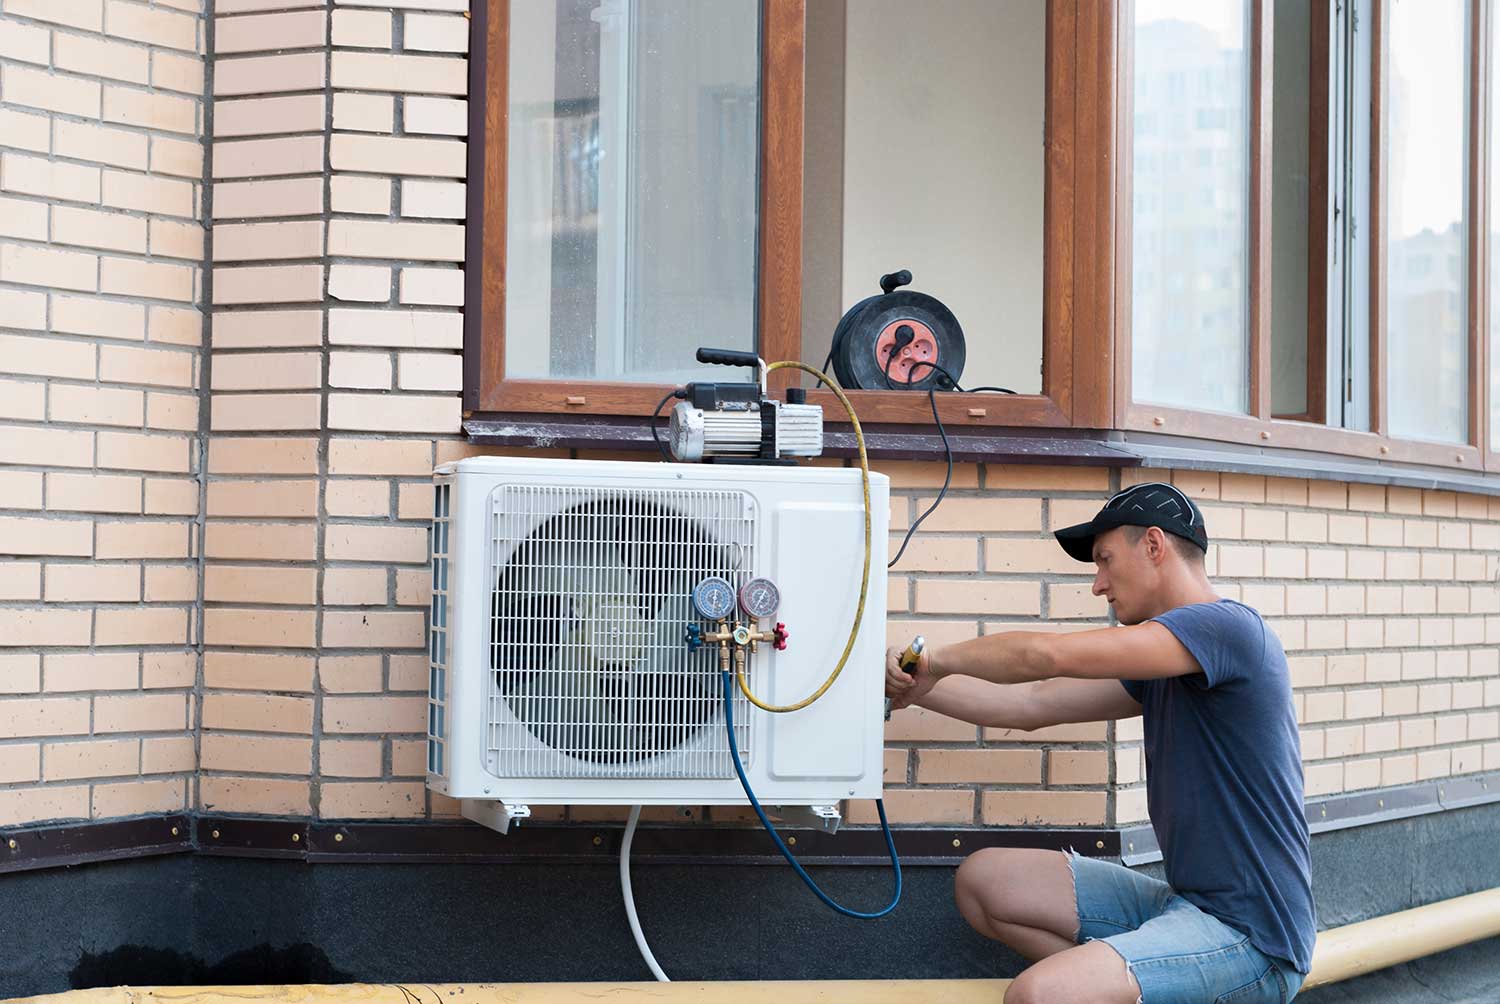 The struggles and joys of being an Heating, Ventilation and A/C serviceman